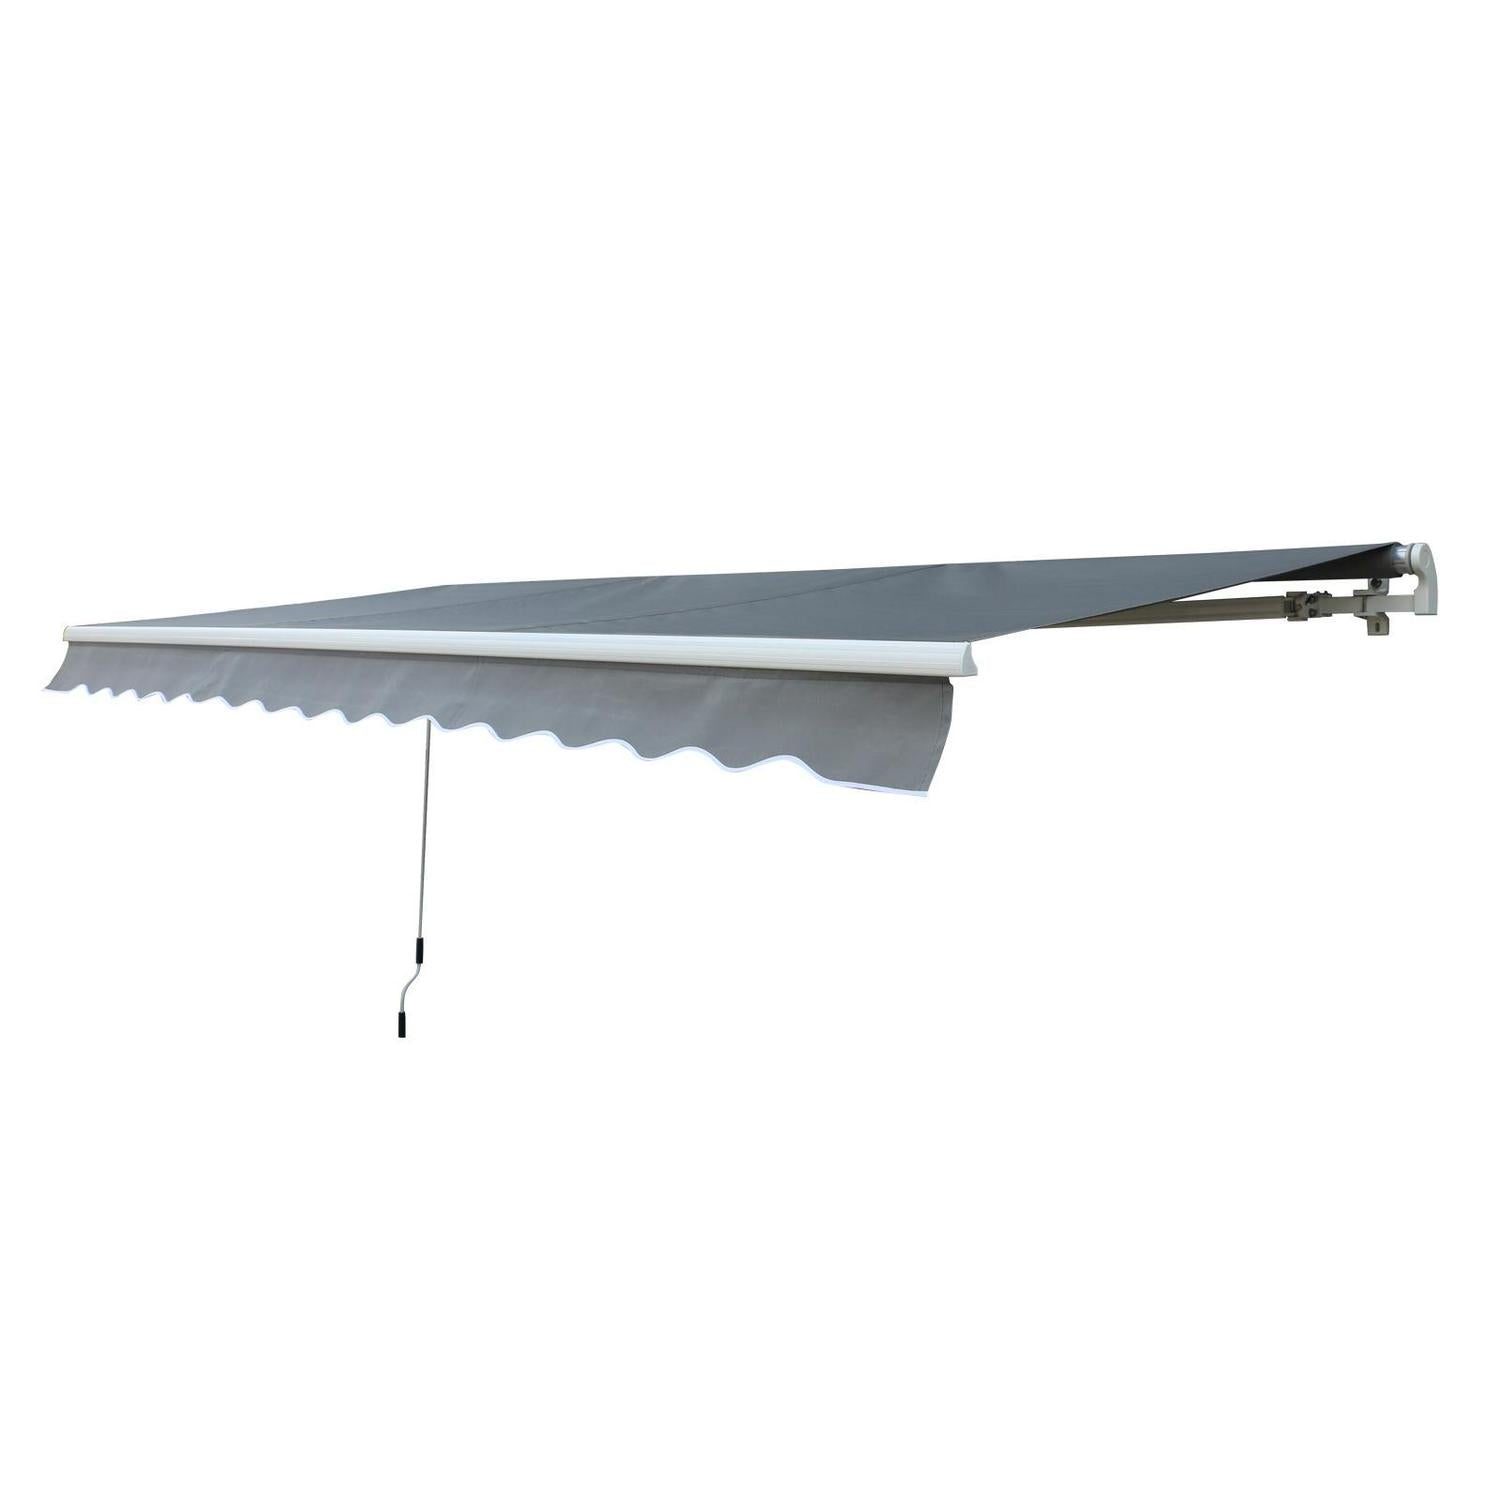 3 X 2.5m Manual Awning Canopy Sun Shade Shelter Retractable For Garden Grey